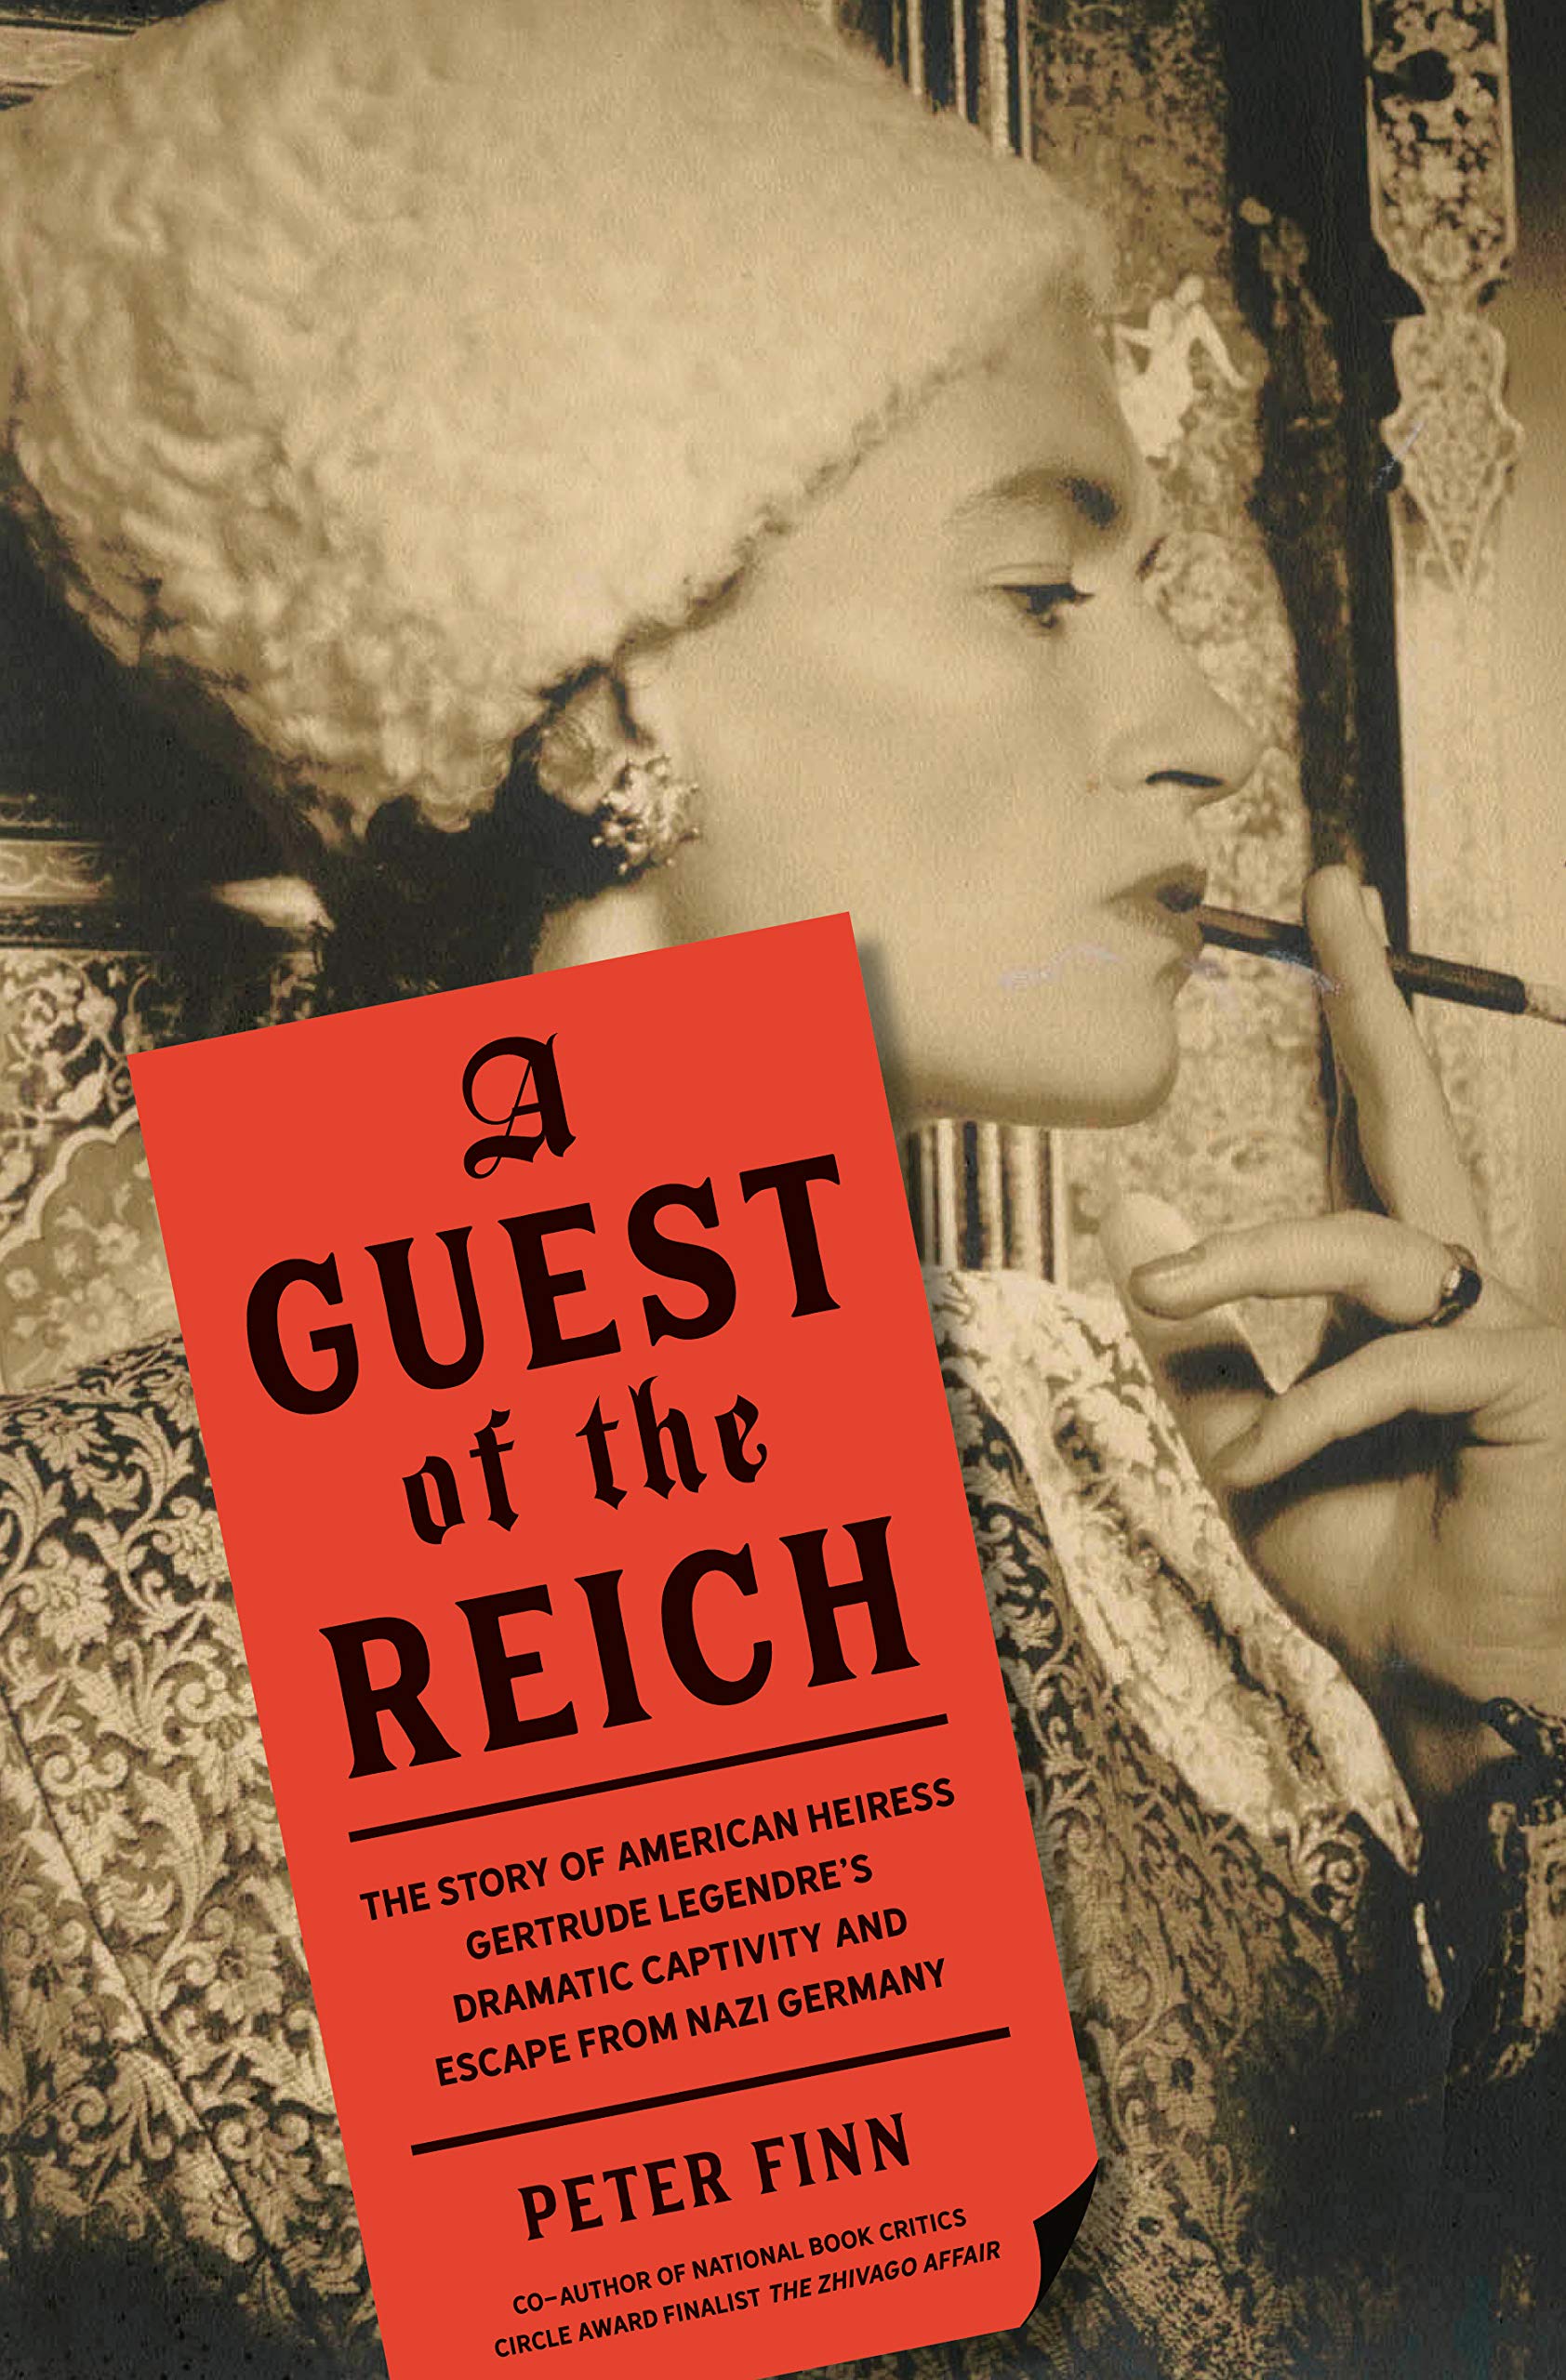 812elKx4wGL Oct. 16 | A Guest of the Reich: The Story of American Heiress Gertrude Legendre